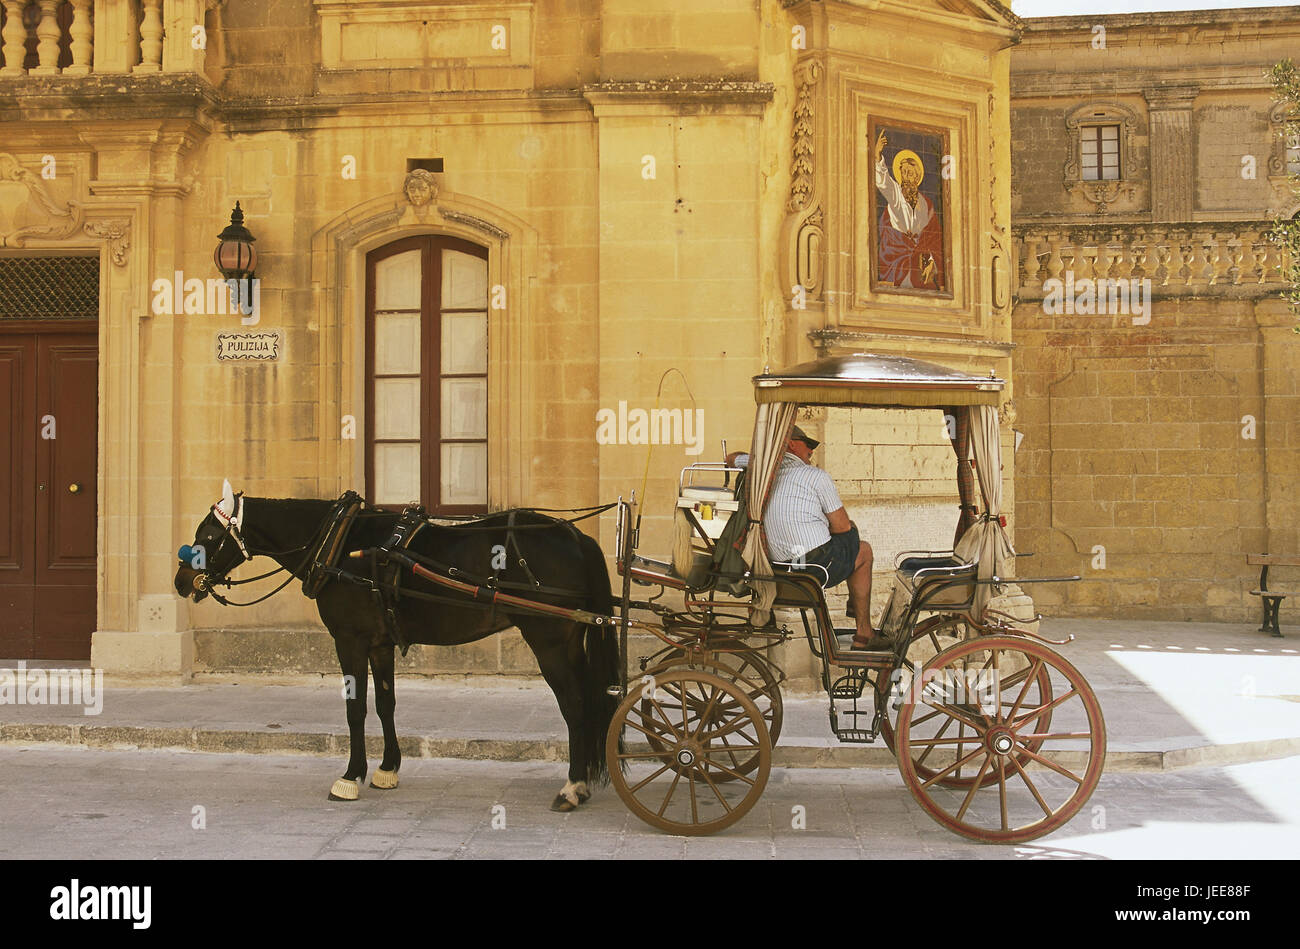 Island Malta, Mdina, Old Town, church, horse's carriage, 'Karozzin', preview, no model release, Maltese islands, Mediterranean island, town, structure, architecture, street, roadside, carriage, Kutschpferd, stand, wait, people, coachmen, means of transportation, means of transportation, round trip, city tour, Kutschfahrt, tourism, Stock Photo